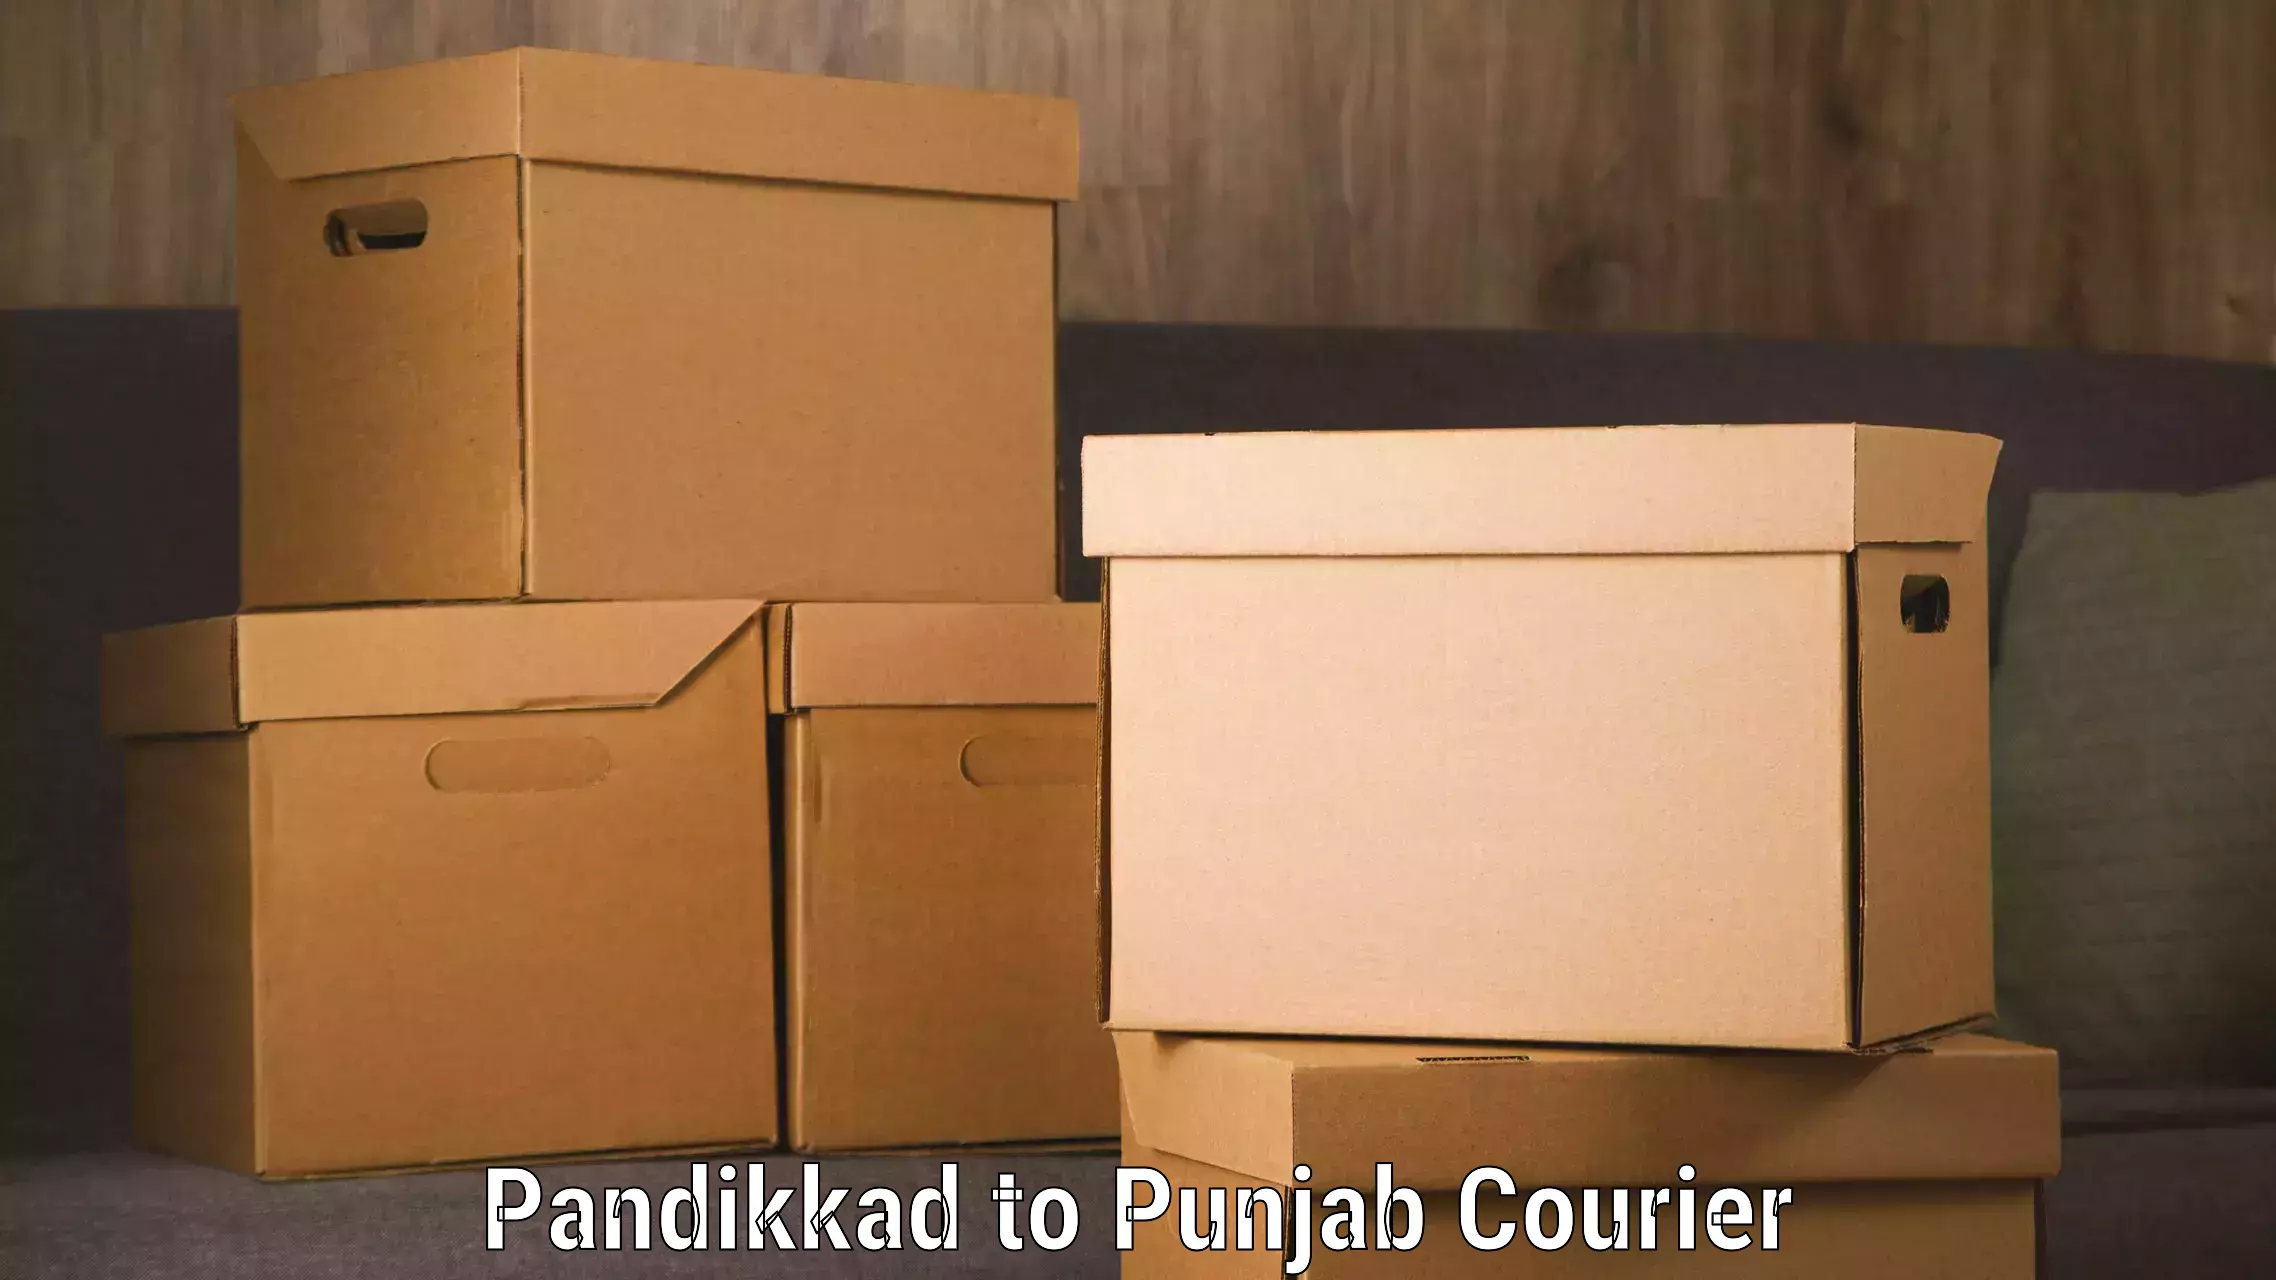 User-friendly courier app Pandikkad to Malout